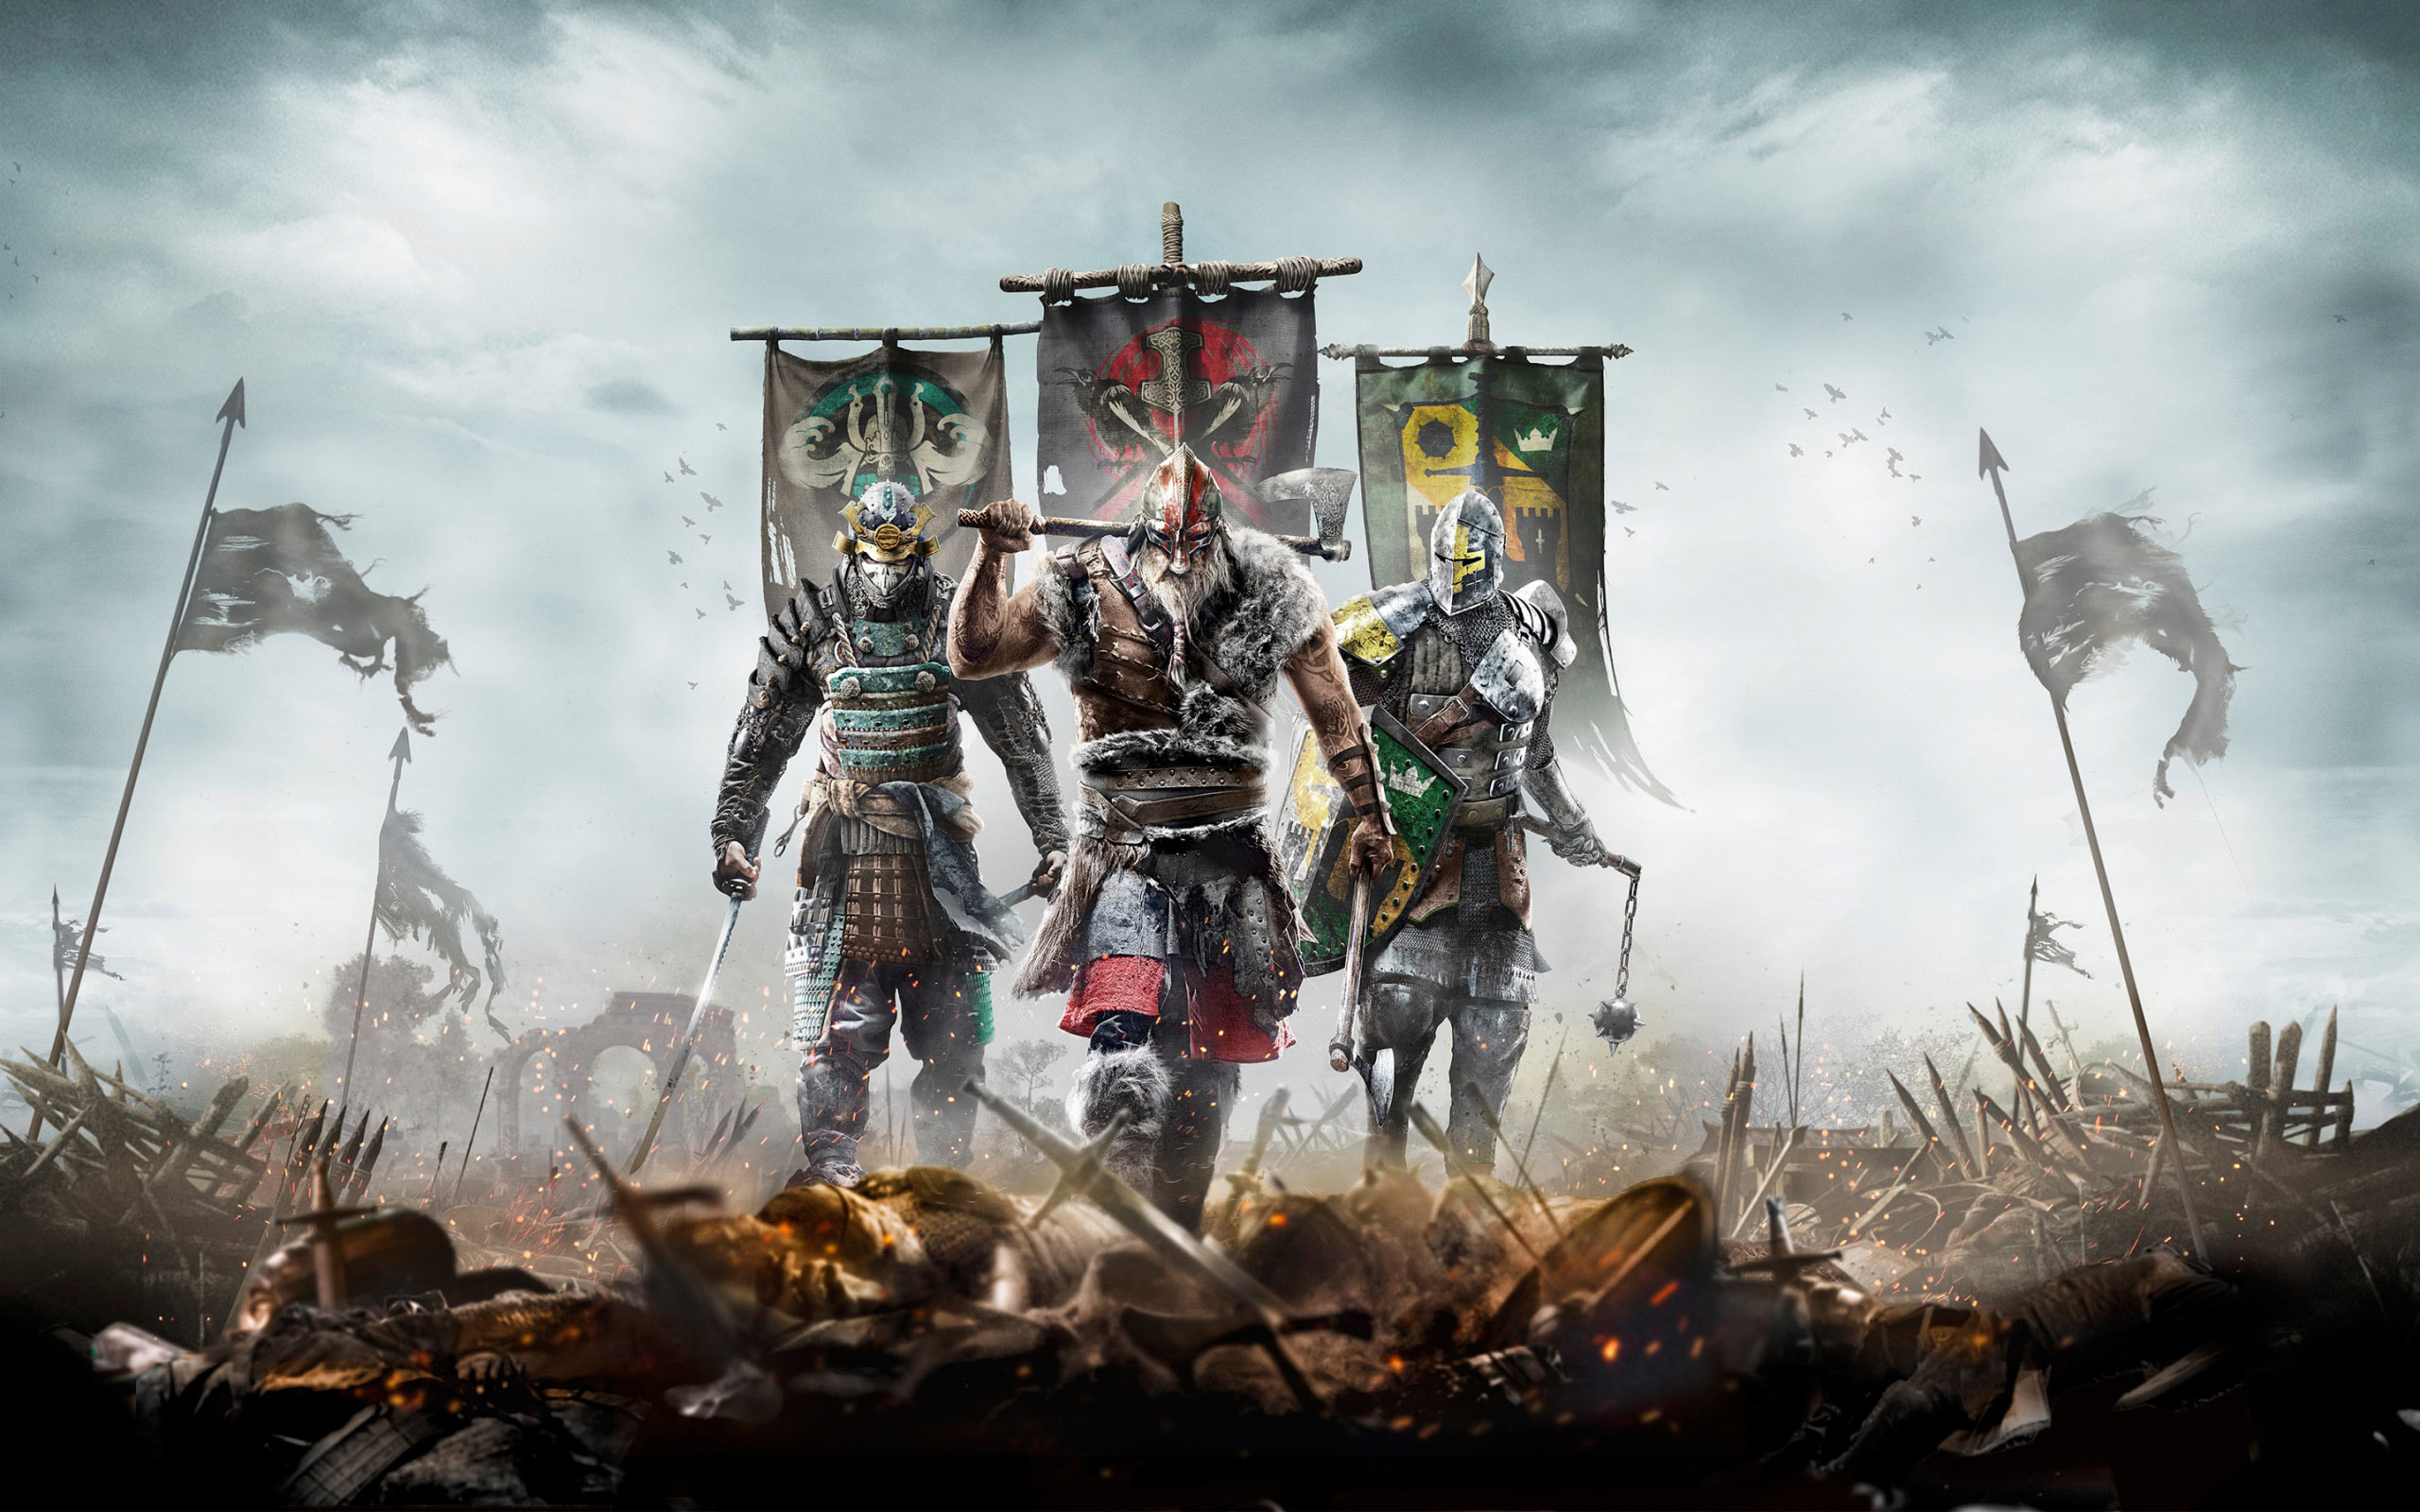 Wallpaper HD For Honor #ForHonor #Ubisoft #PC #PS4 #XboxOne #Vikings